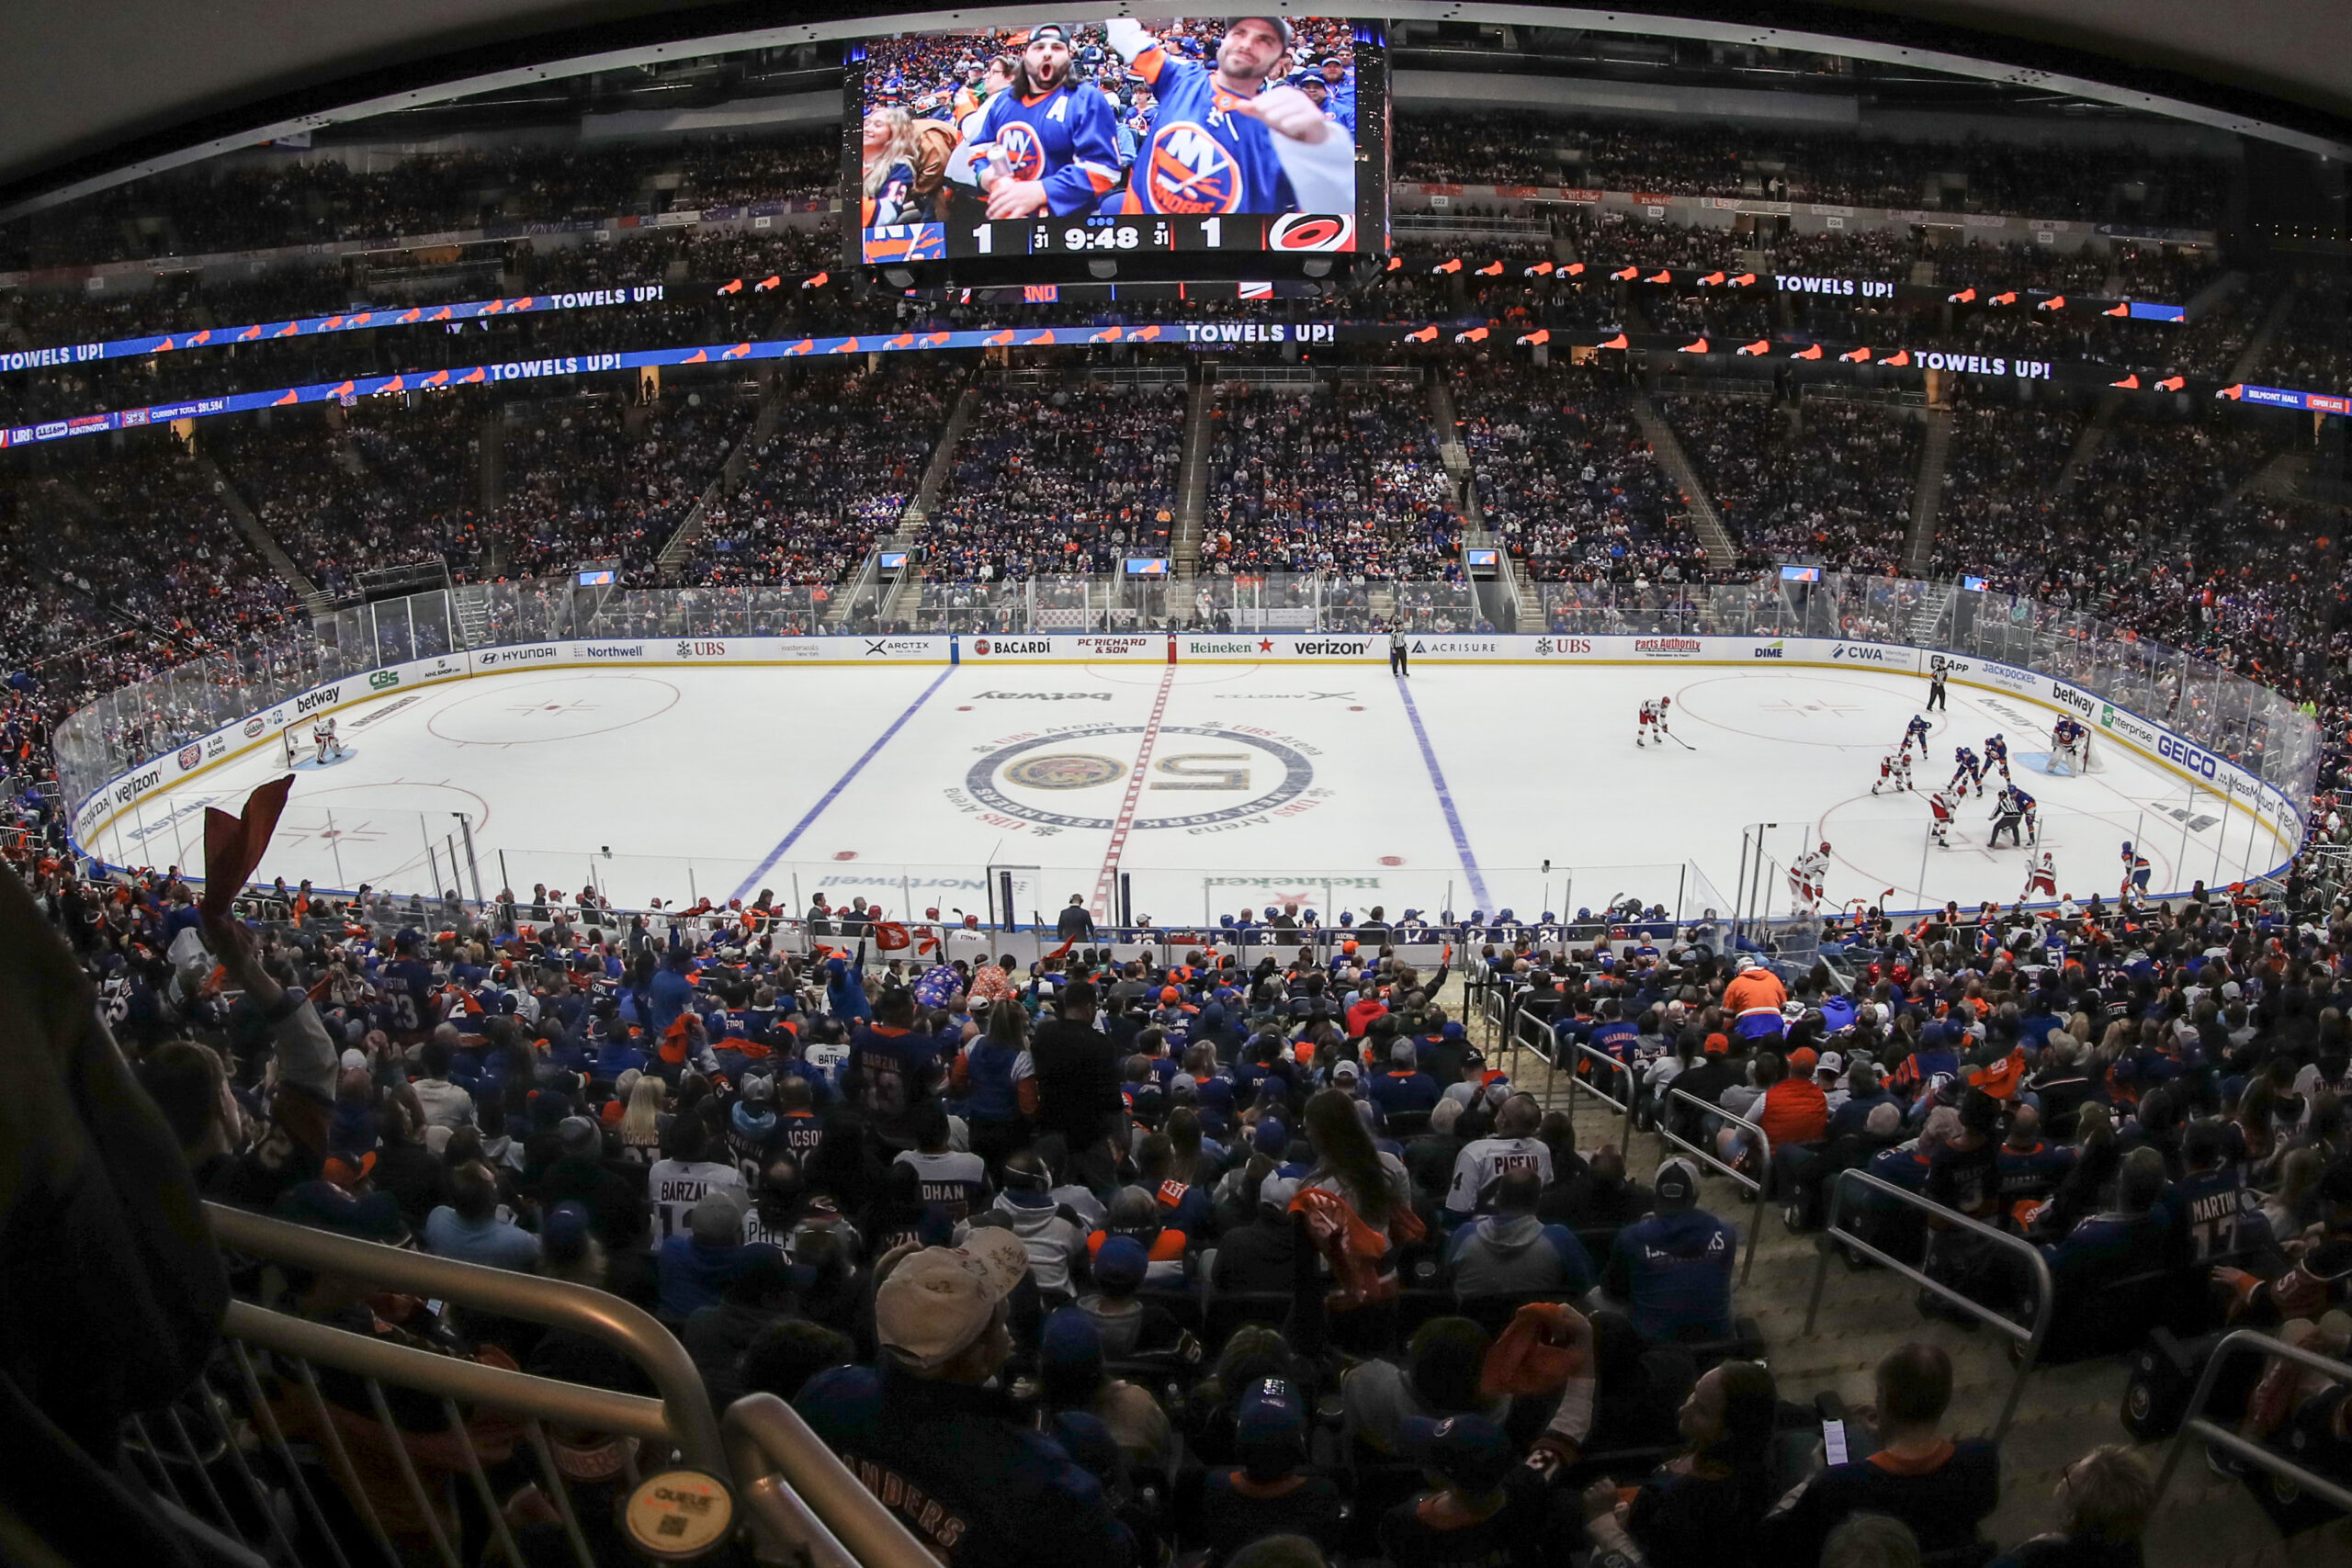 Islanders Struggle to Close Games, Face Criticism for Coaching